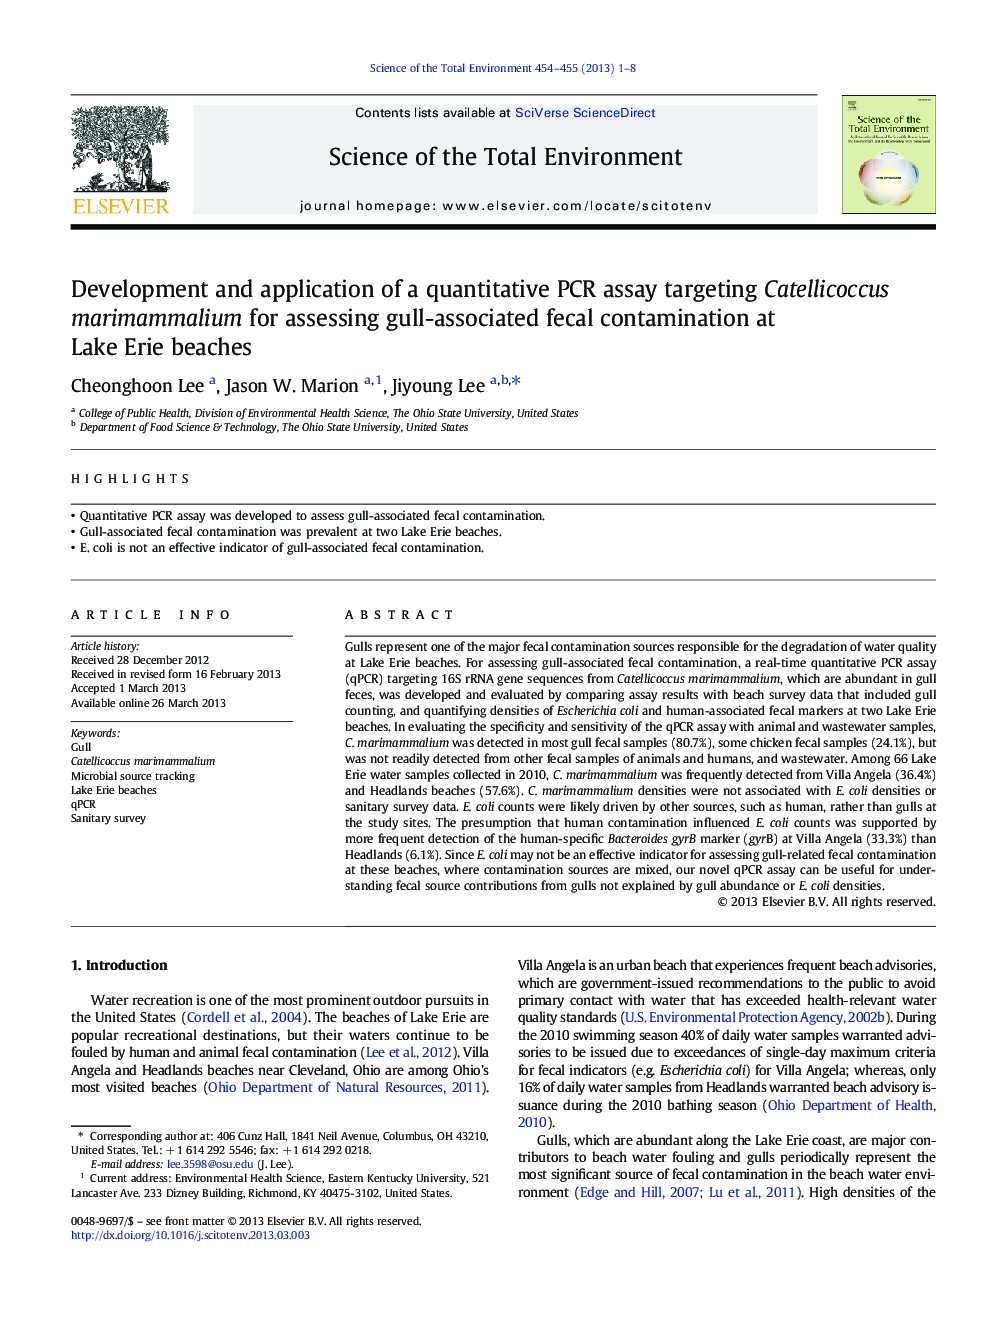 Development and application of a quantitative PCR assay targeting Catellicoccus marimammalium for assessing gull-associated fecal contamination at Lake Erie beaches